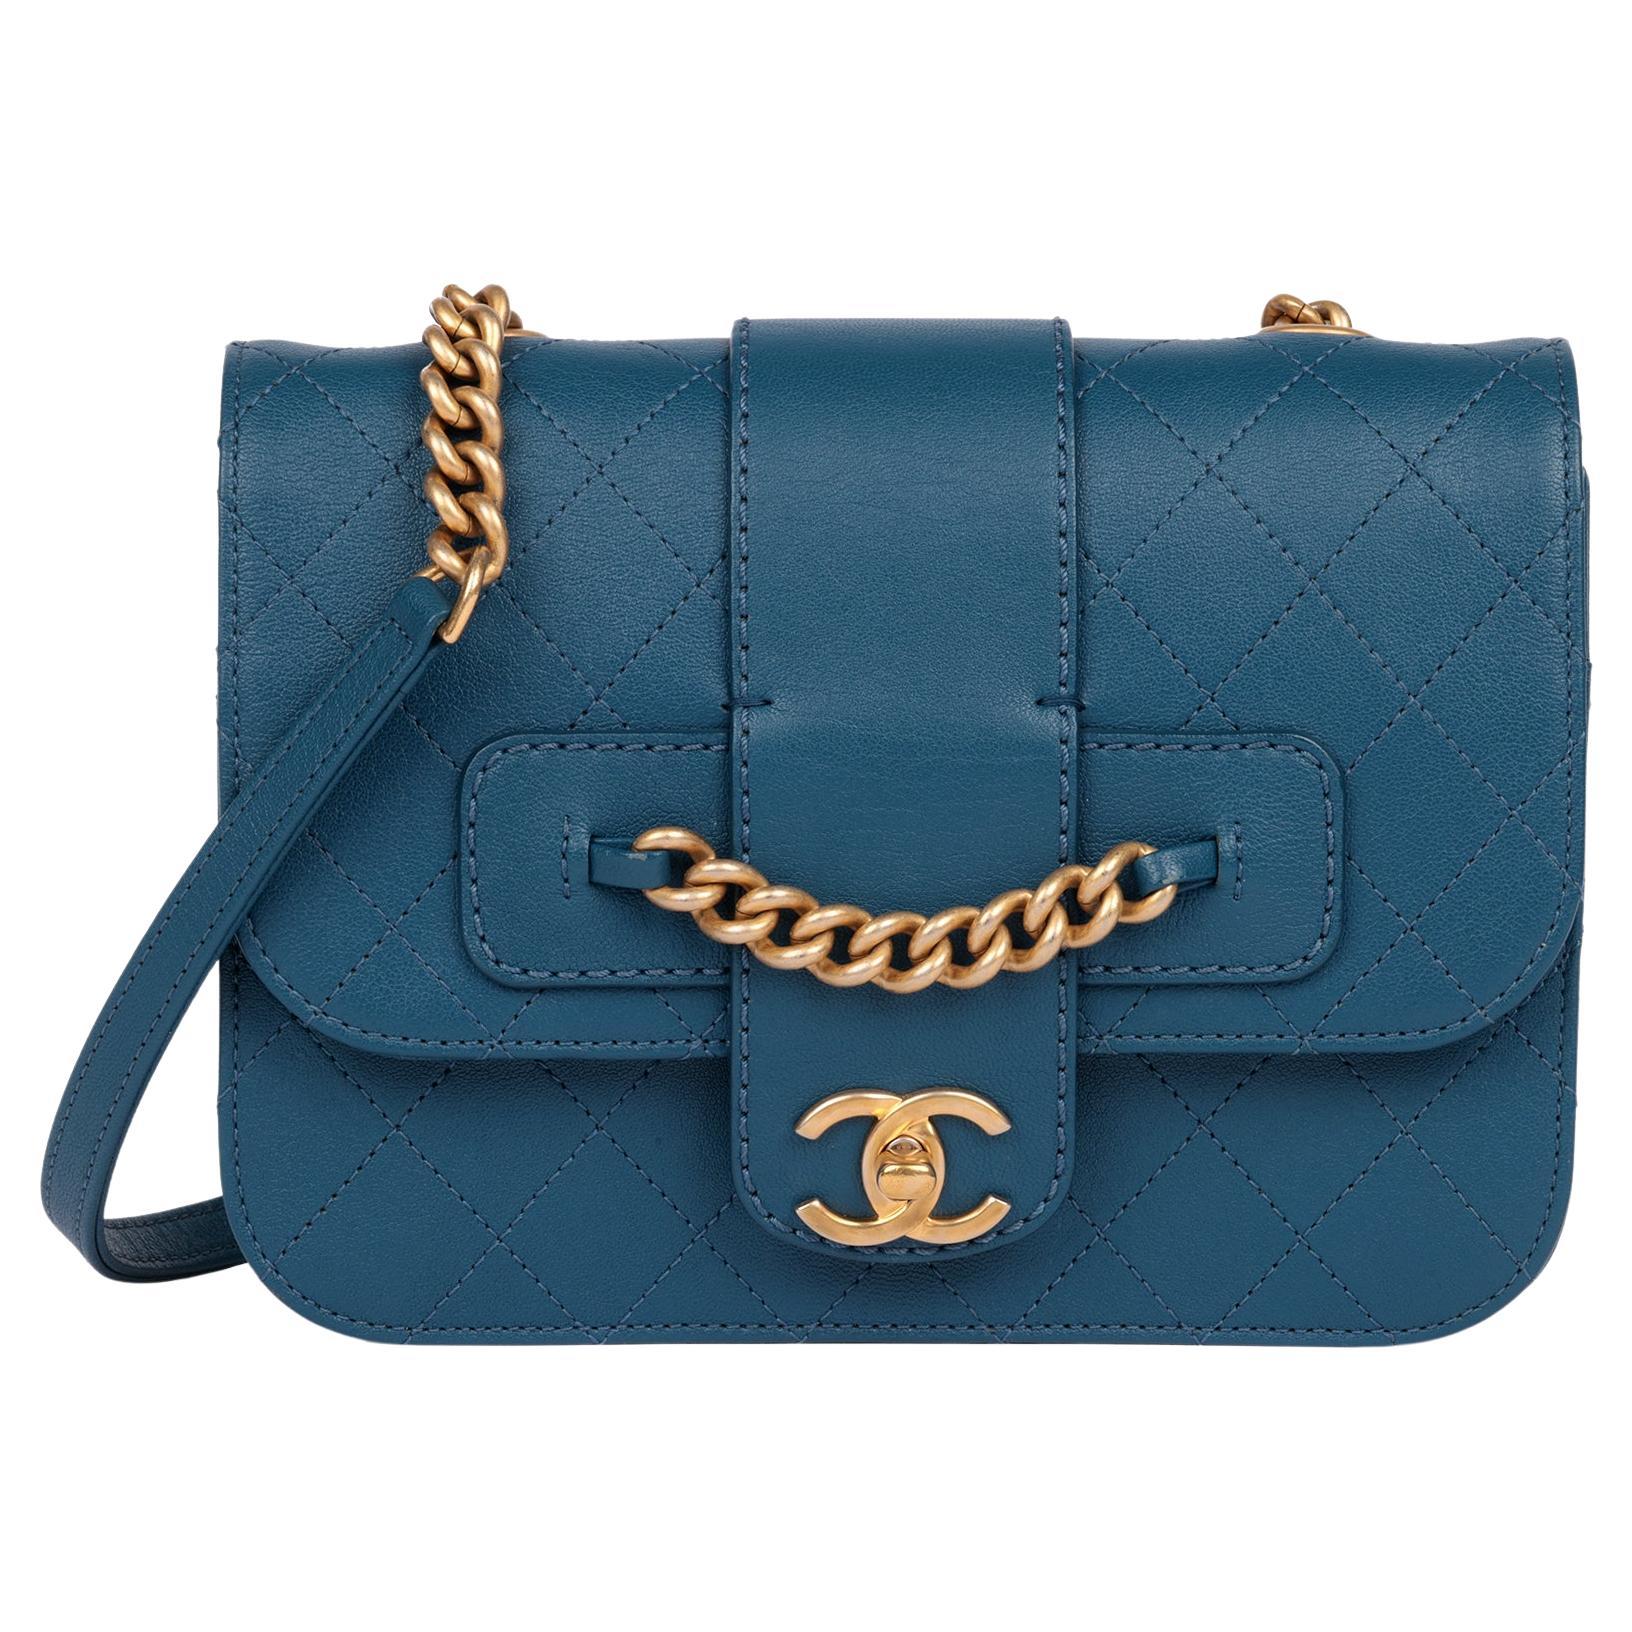 CHANEL Blue Quilted Calfskin Leather Mini Chain Front Classic Single Flap Bag For Sale